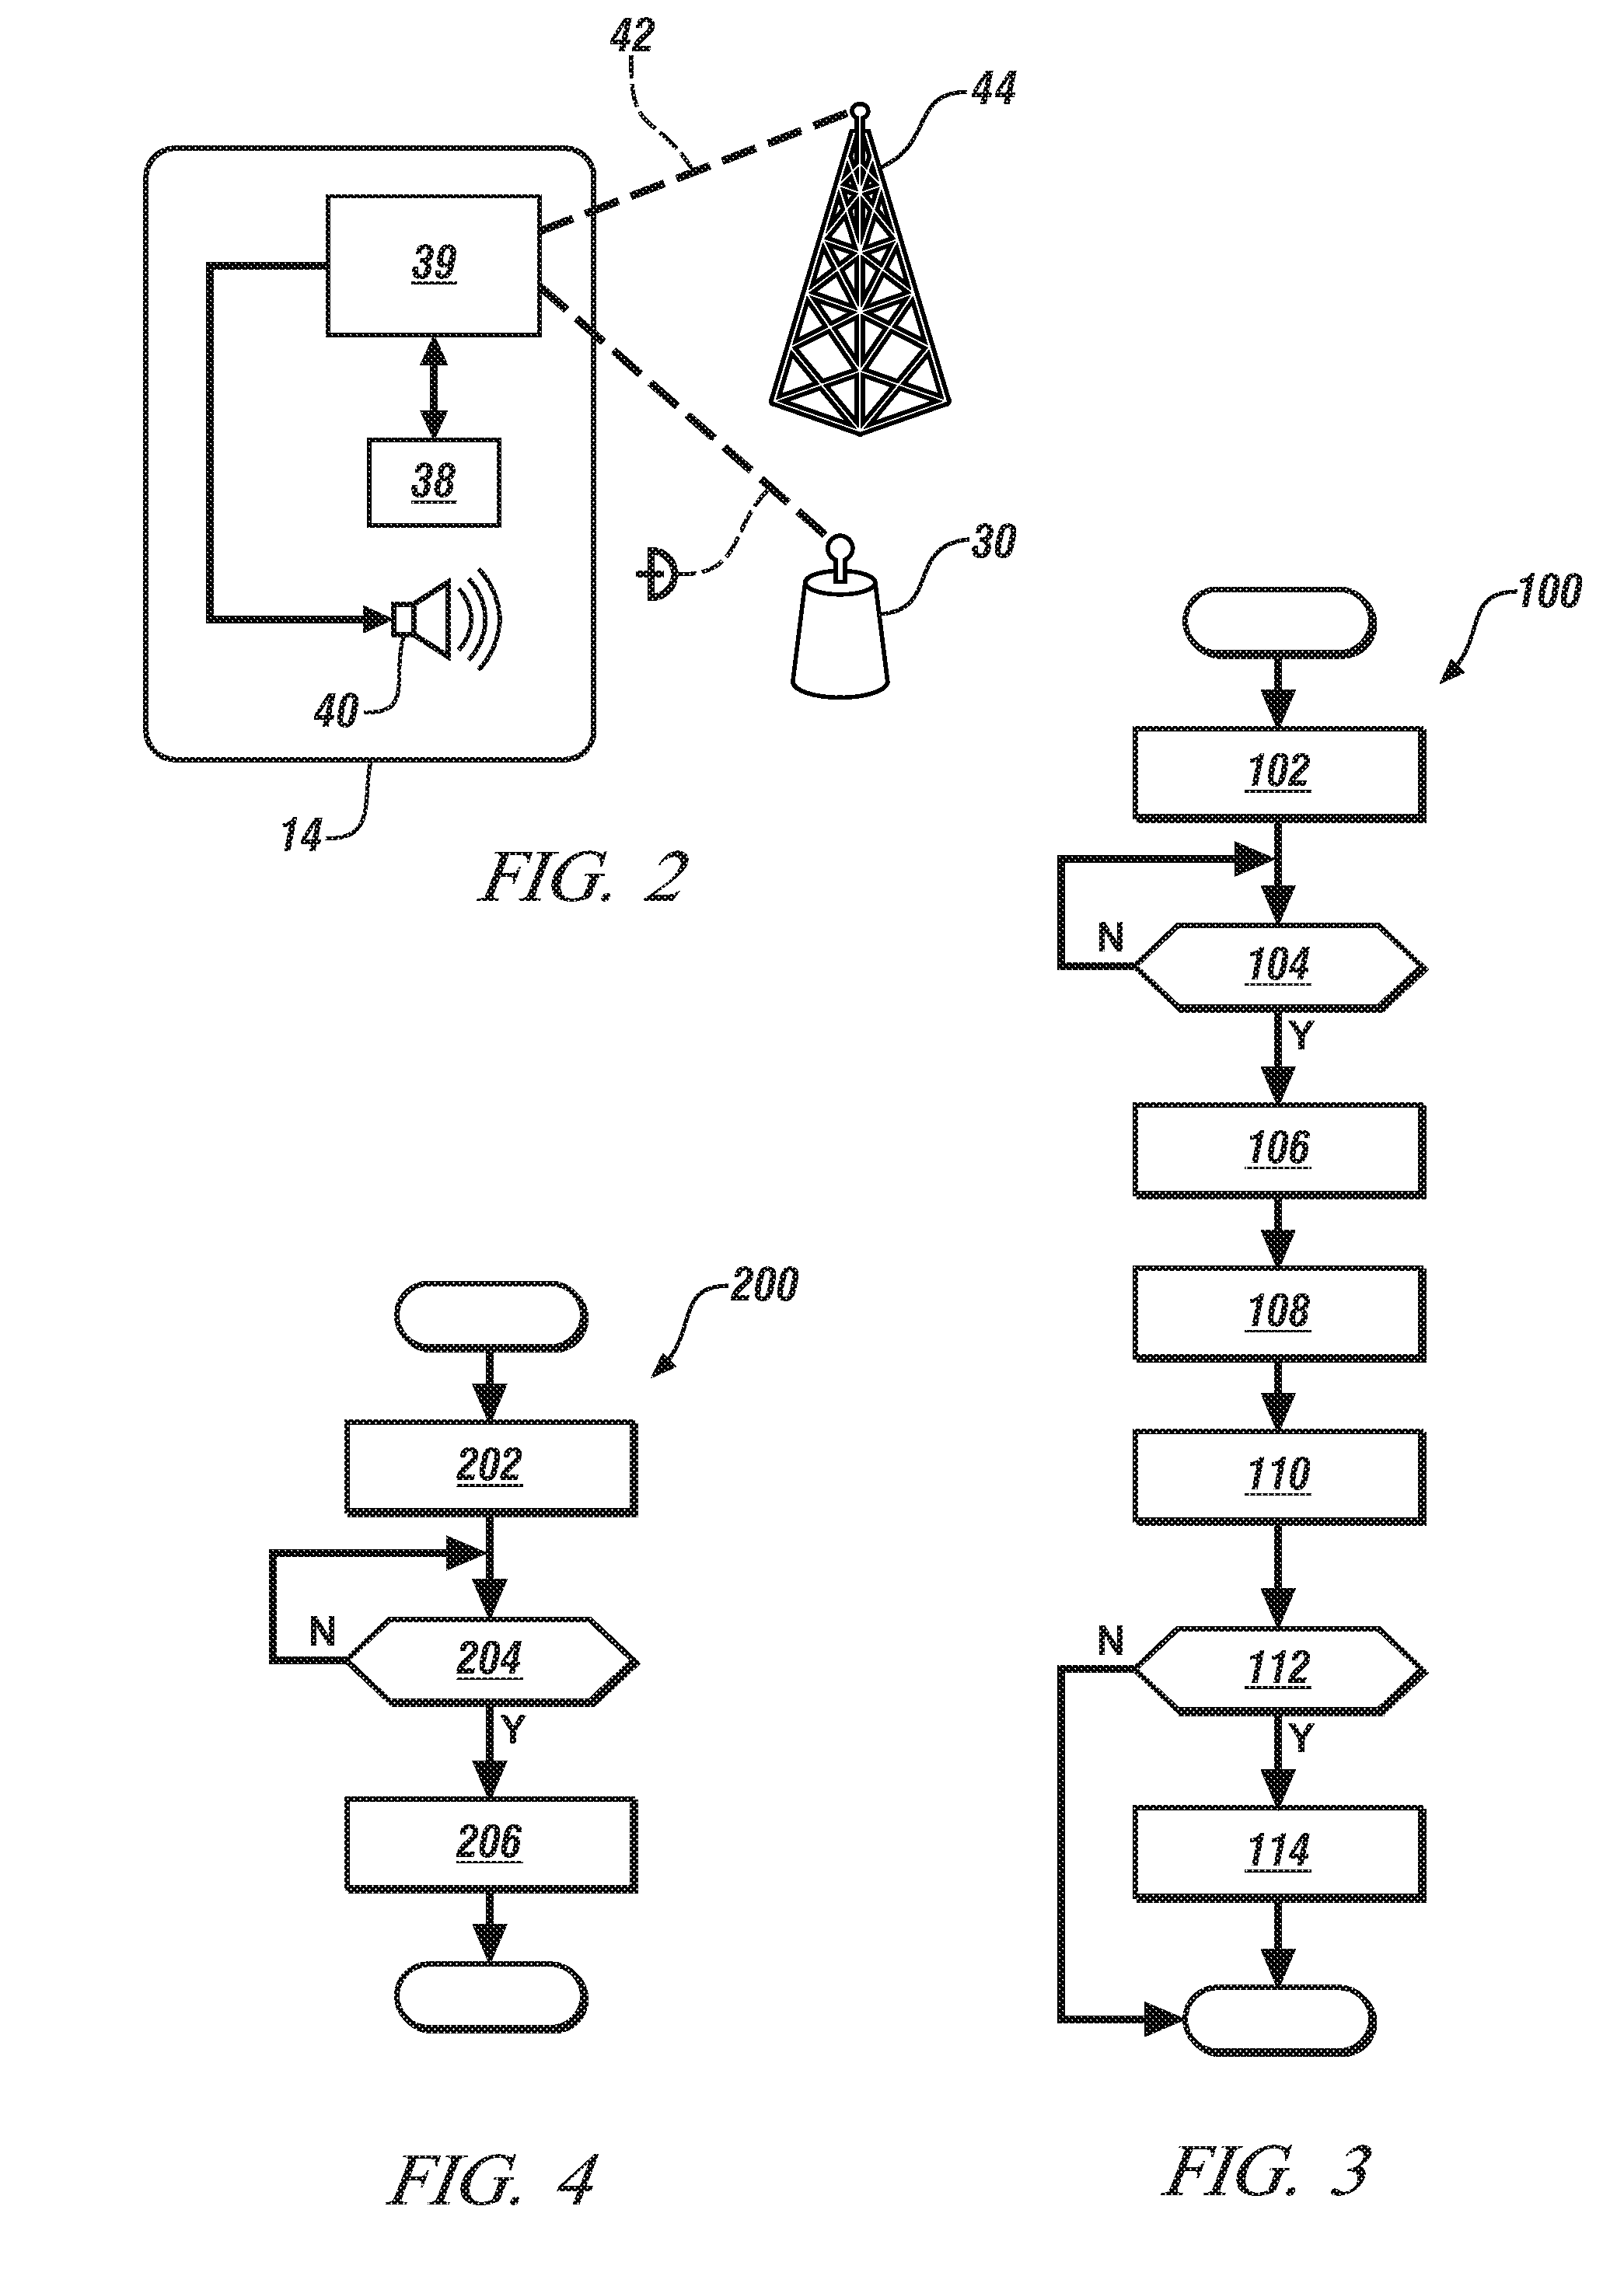 System for providing a reminder to remove a mobile electronic device from a vehicle